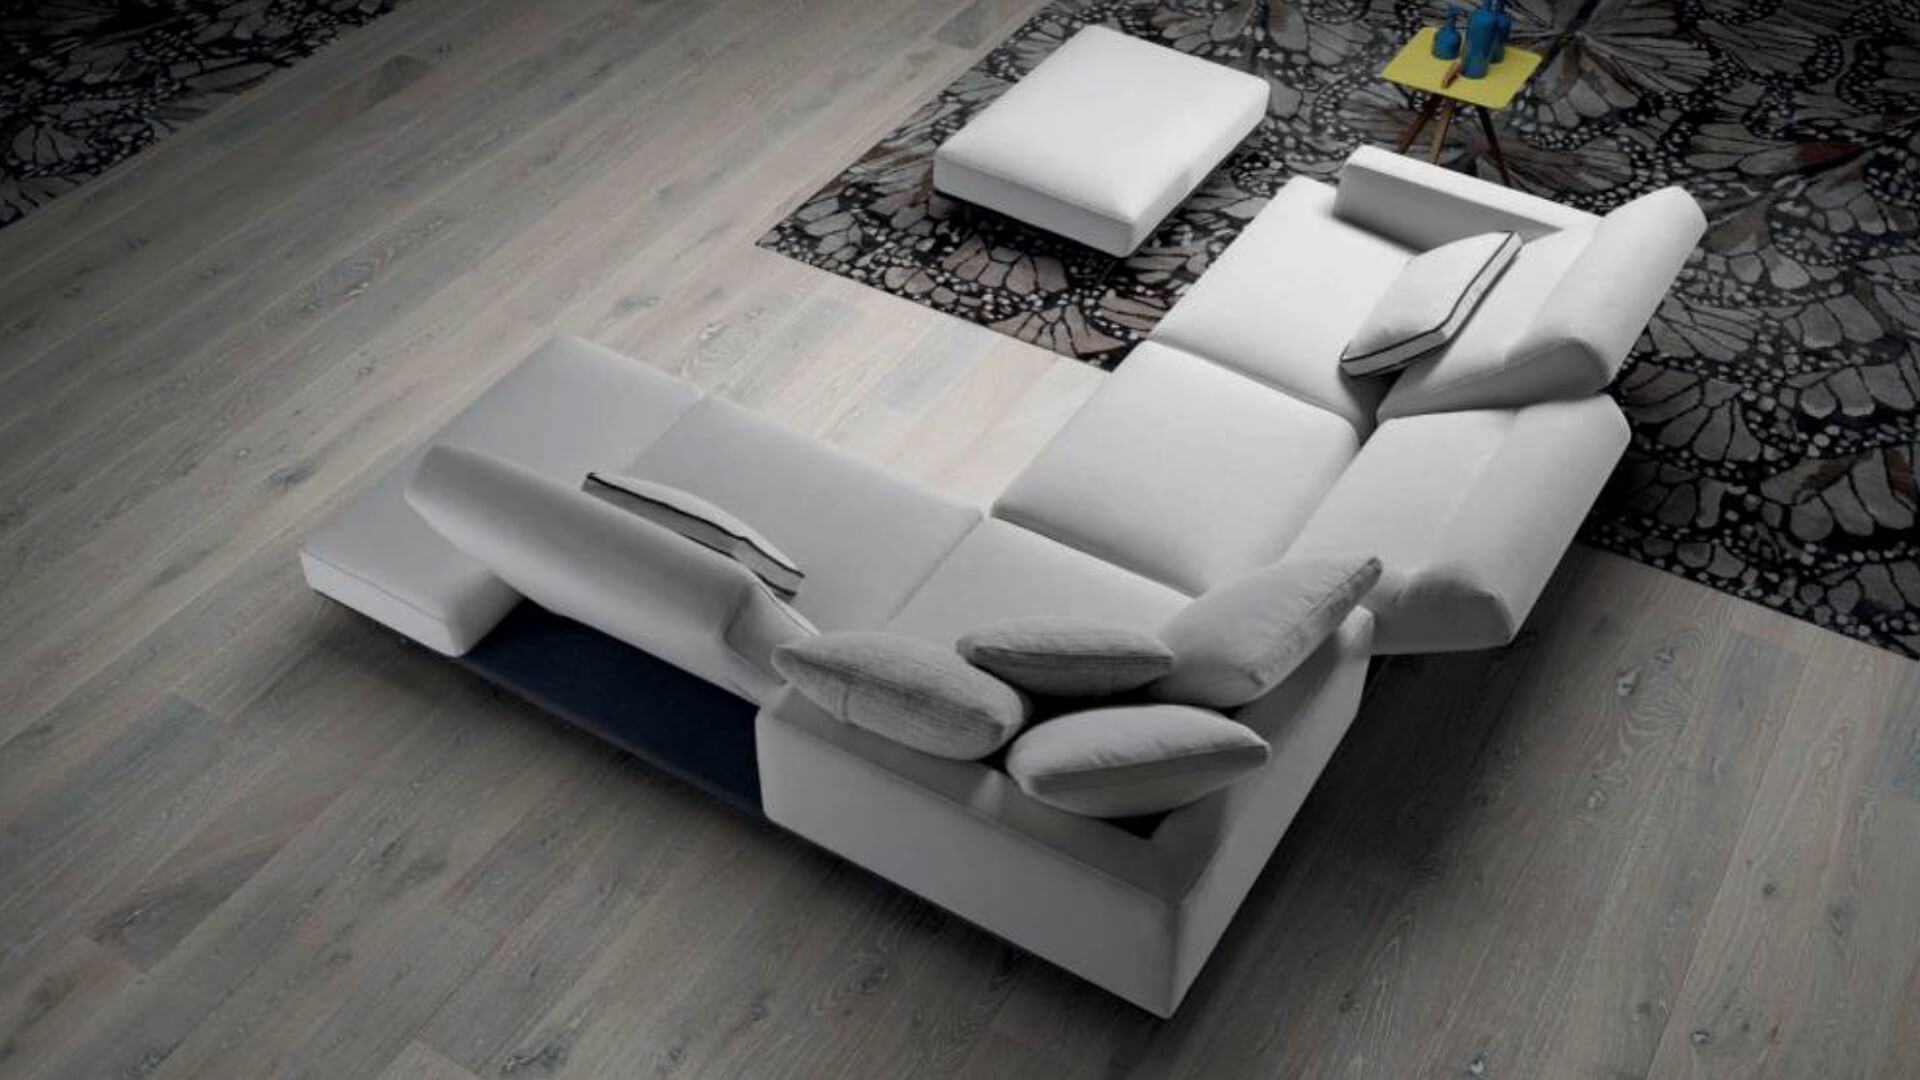 Blog IDW - XXL sofas: the models not to be missed